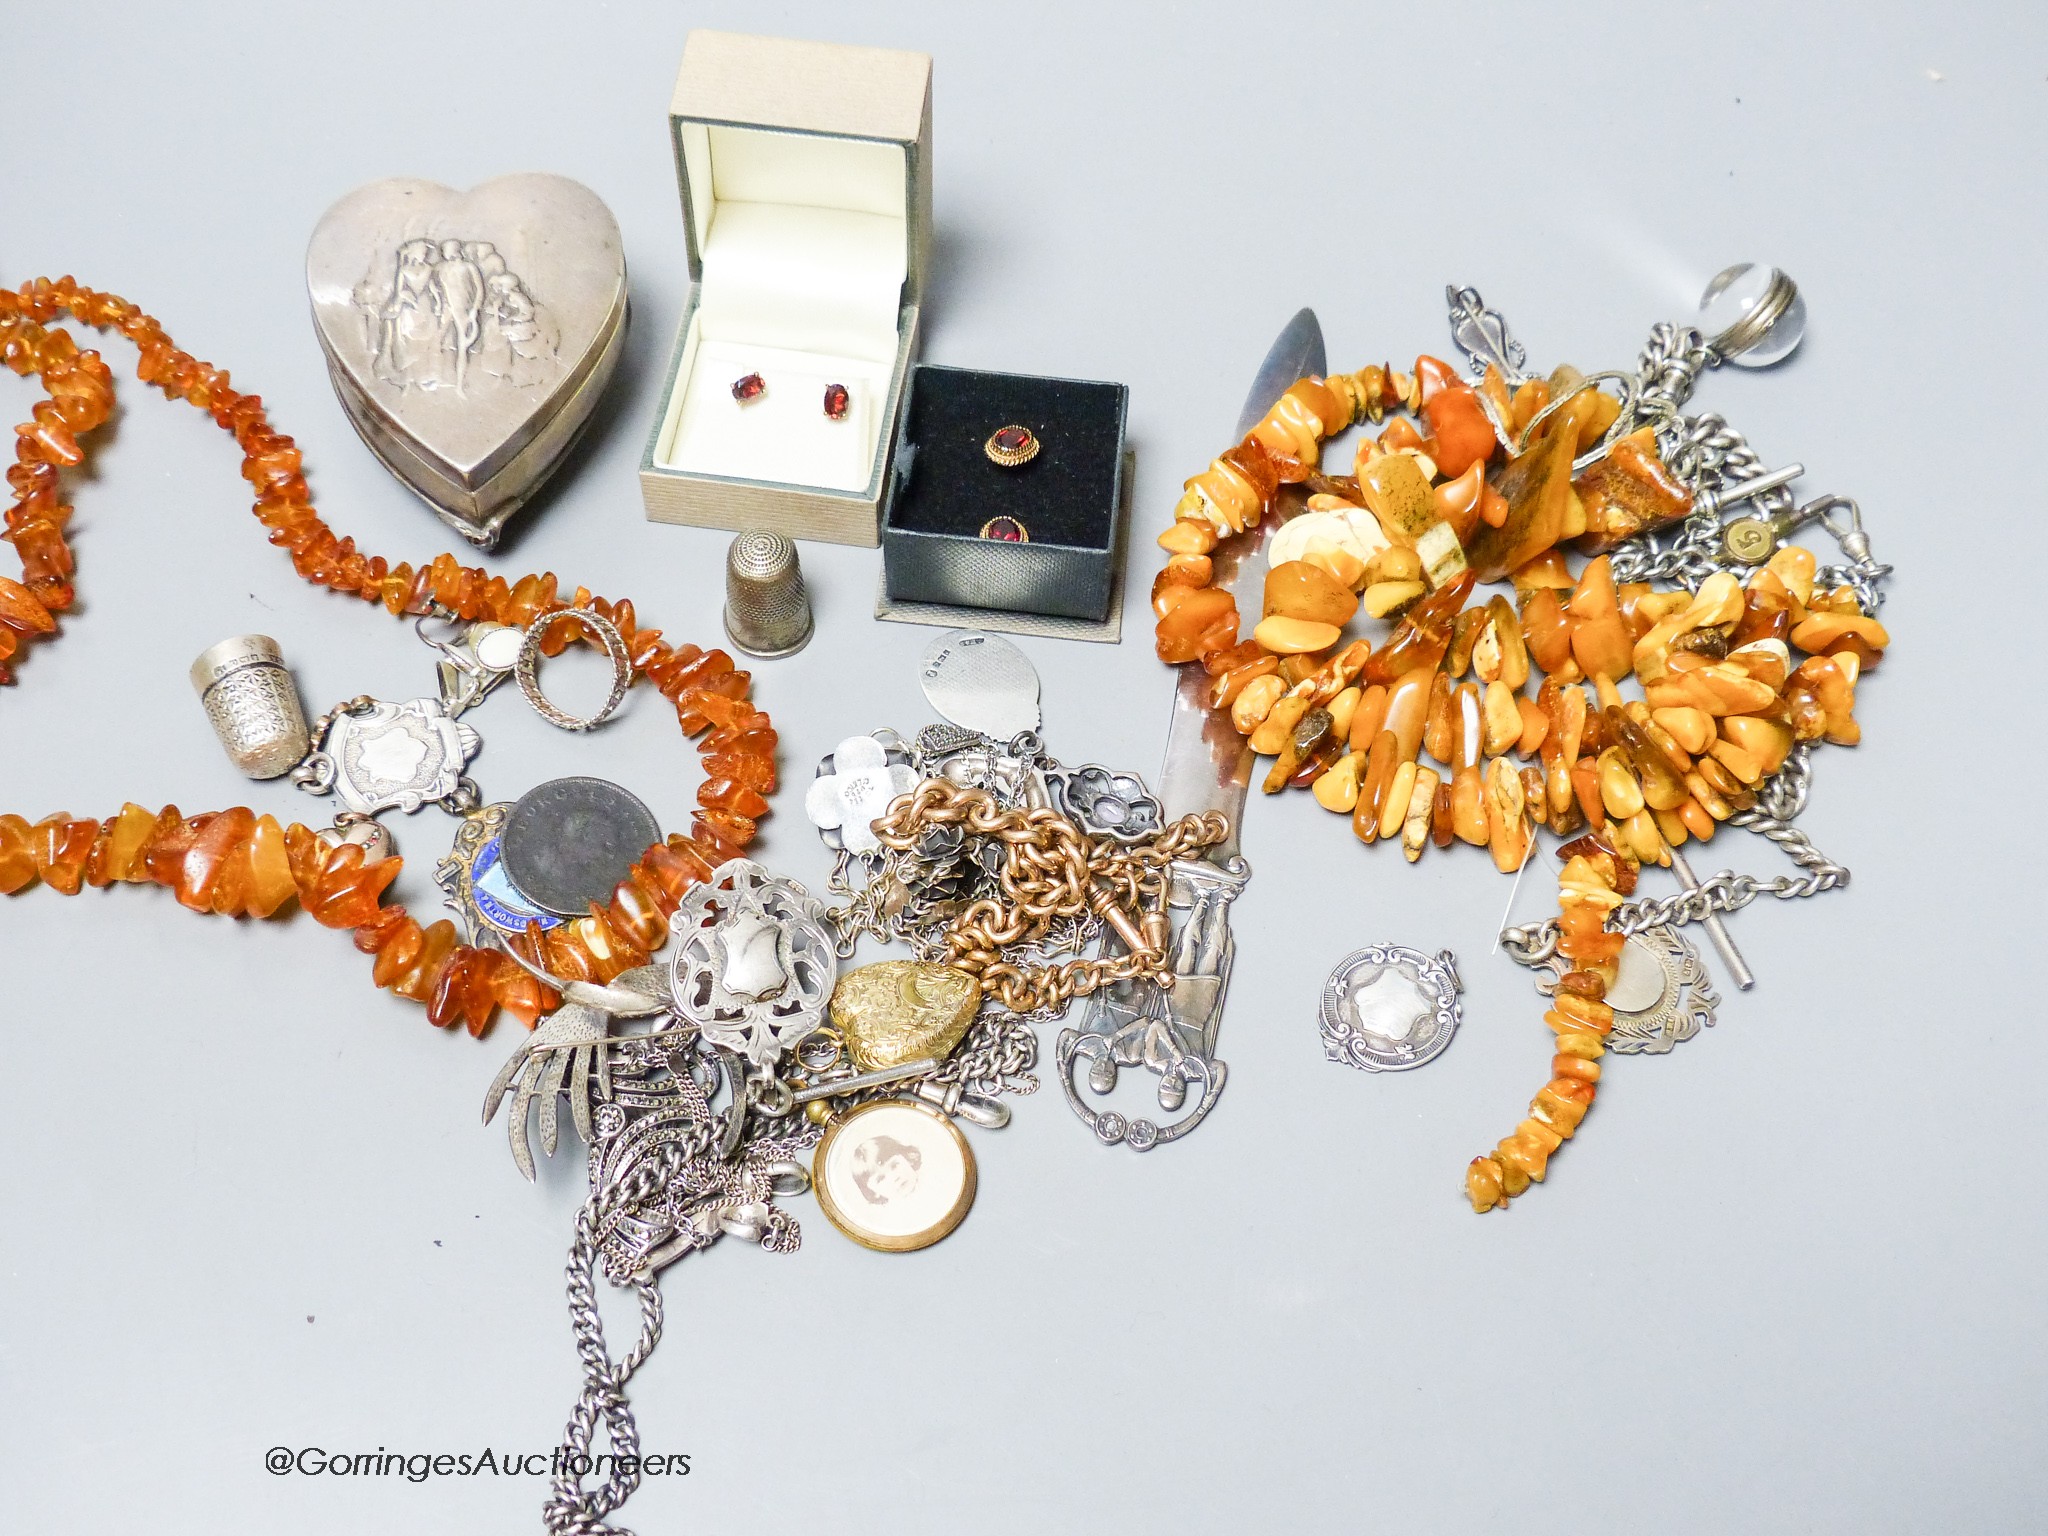 Mixed jewellery etc. including amber necklaces, silver trinket box and other items.